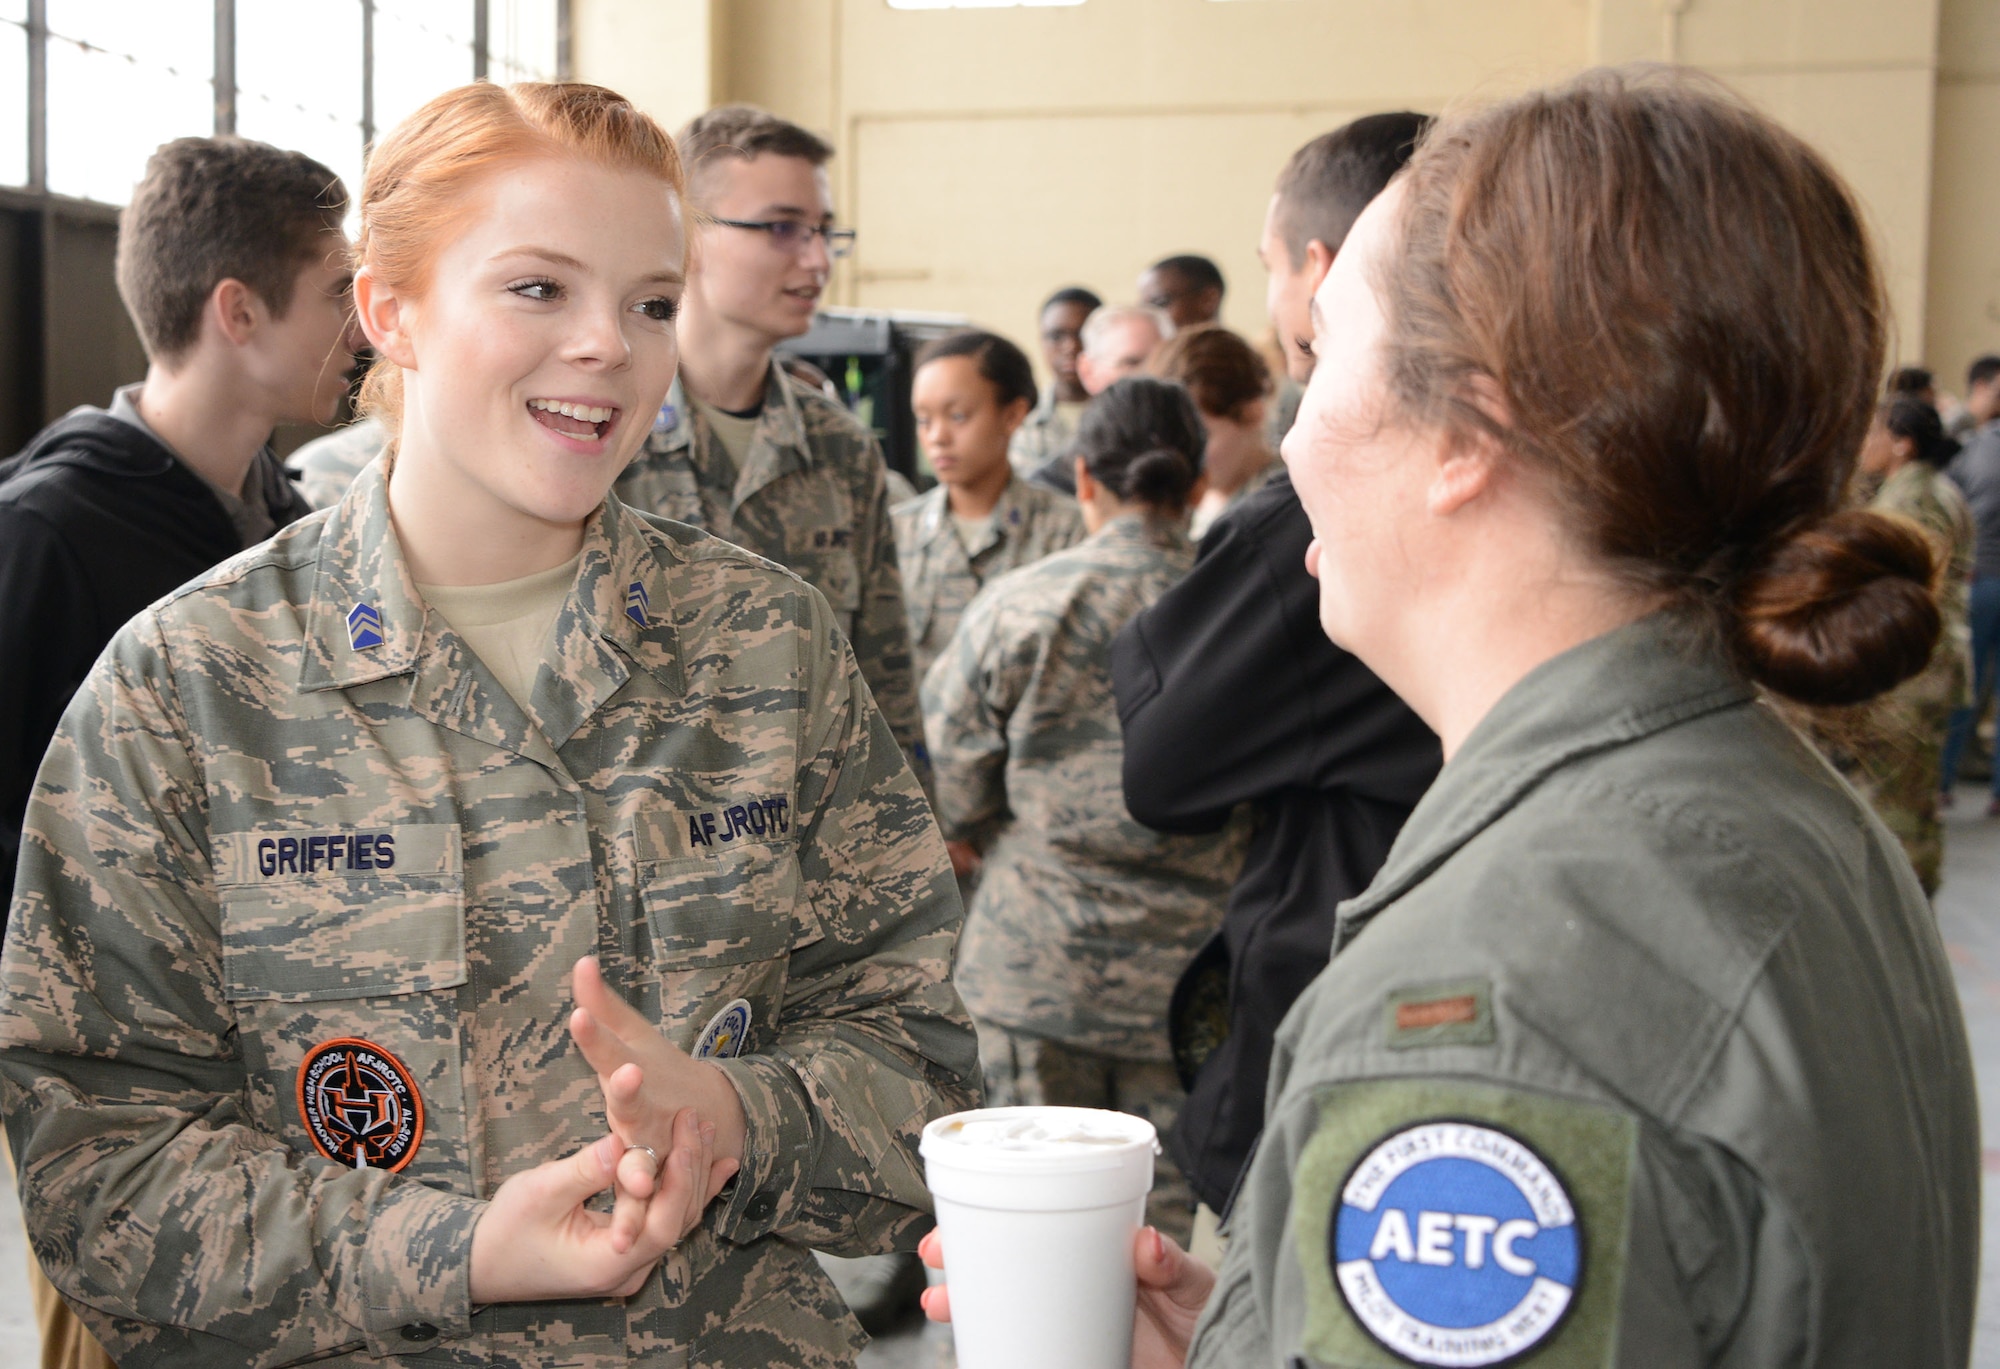 An Air Force mentor talks to a student during the Aim High Outreach event at Maxwell Air Force Base, Alabama.